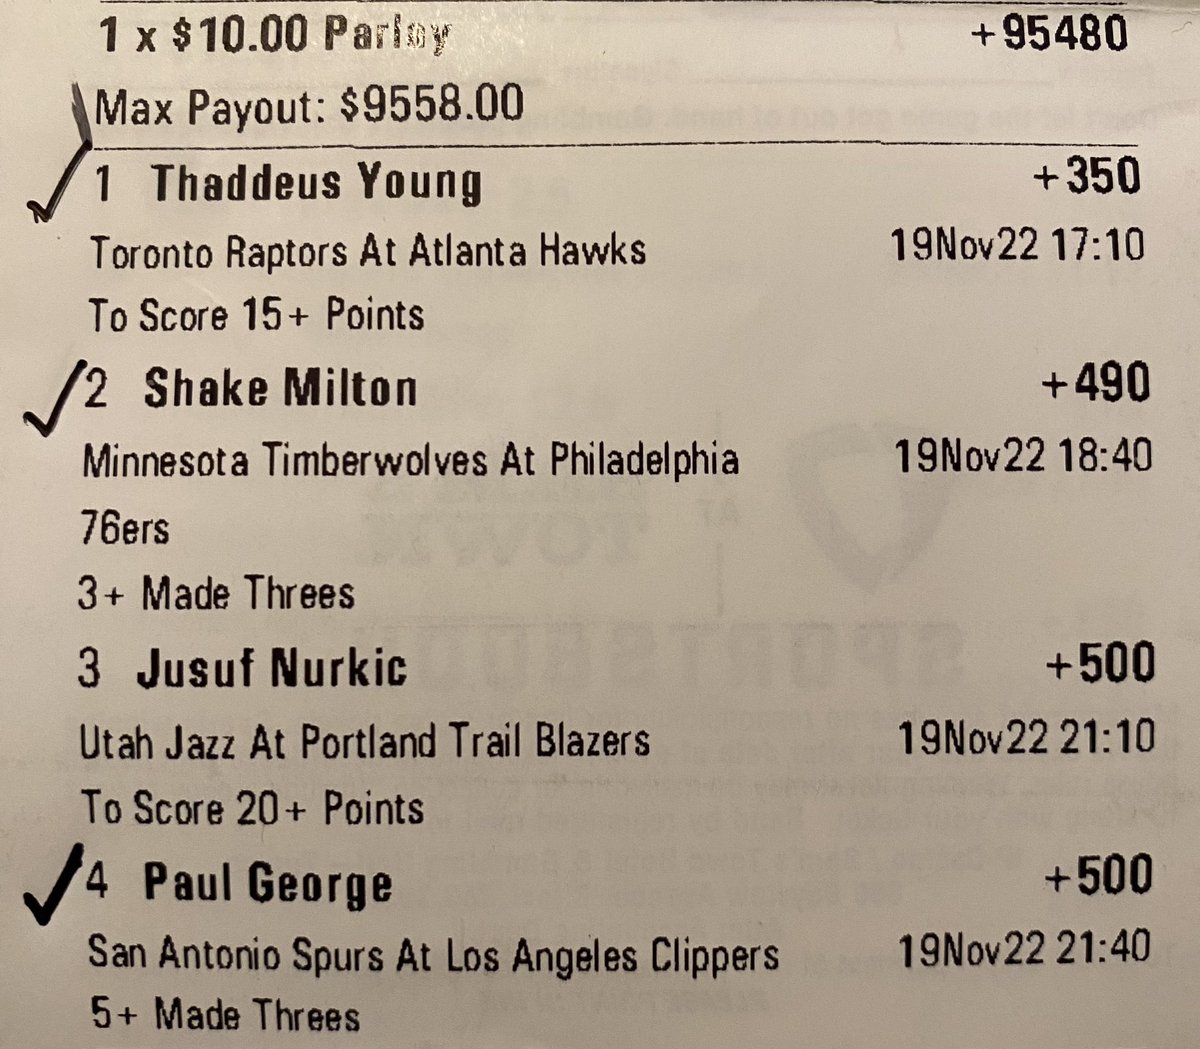 I have no words for this bad beat I just took. Needed 2 points from Jusuf Nurkic @bosnianbeast27 and he almost got me to the promise land! #GamblingTwiitter #Parlay #nba https://t.co/jQ8CRJoIXG